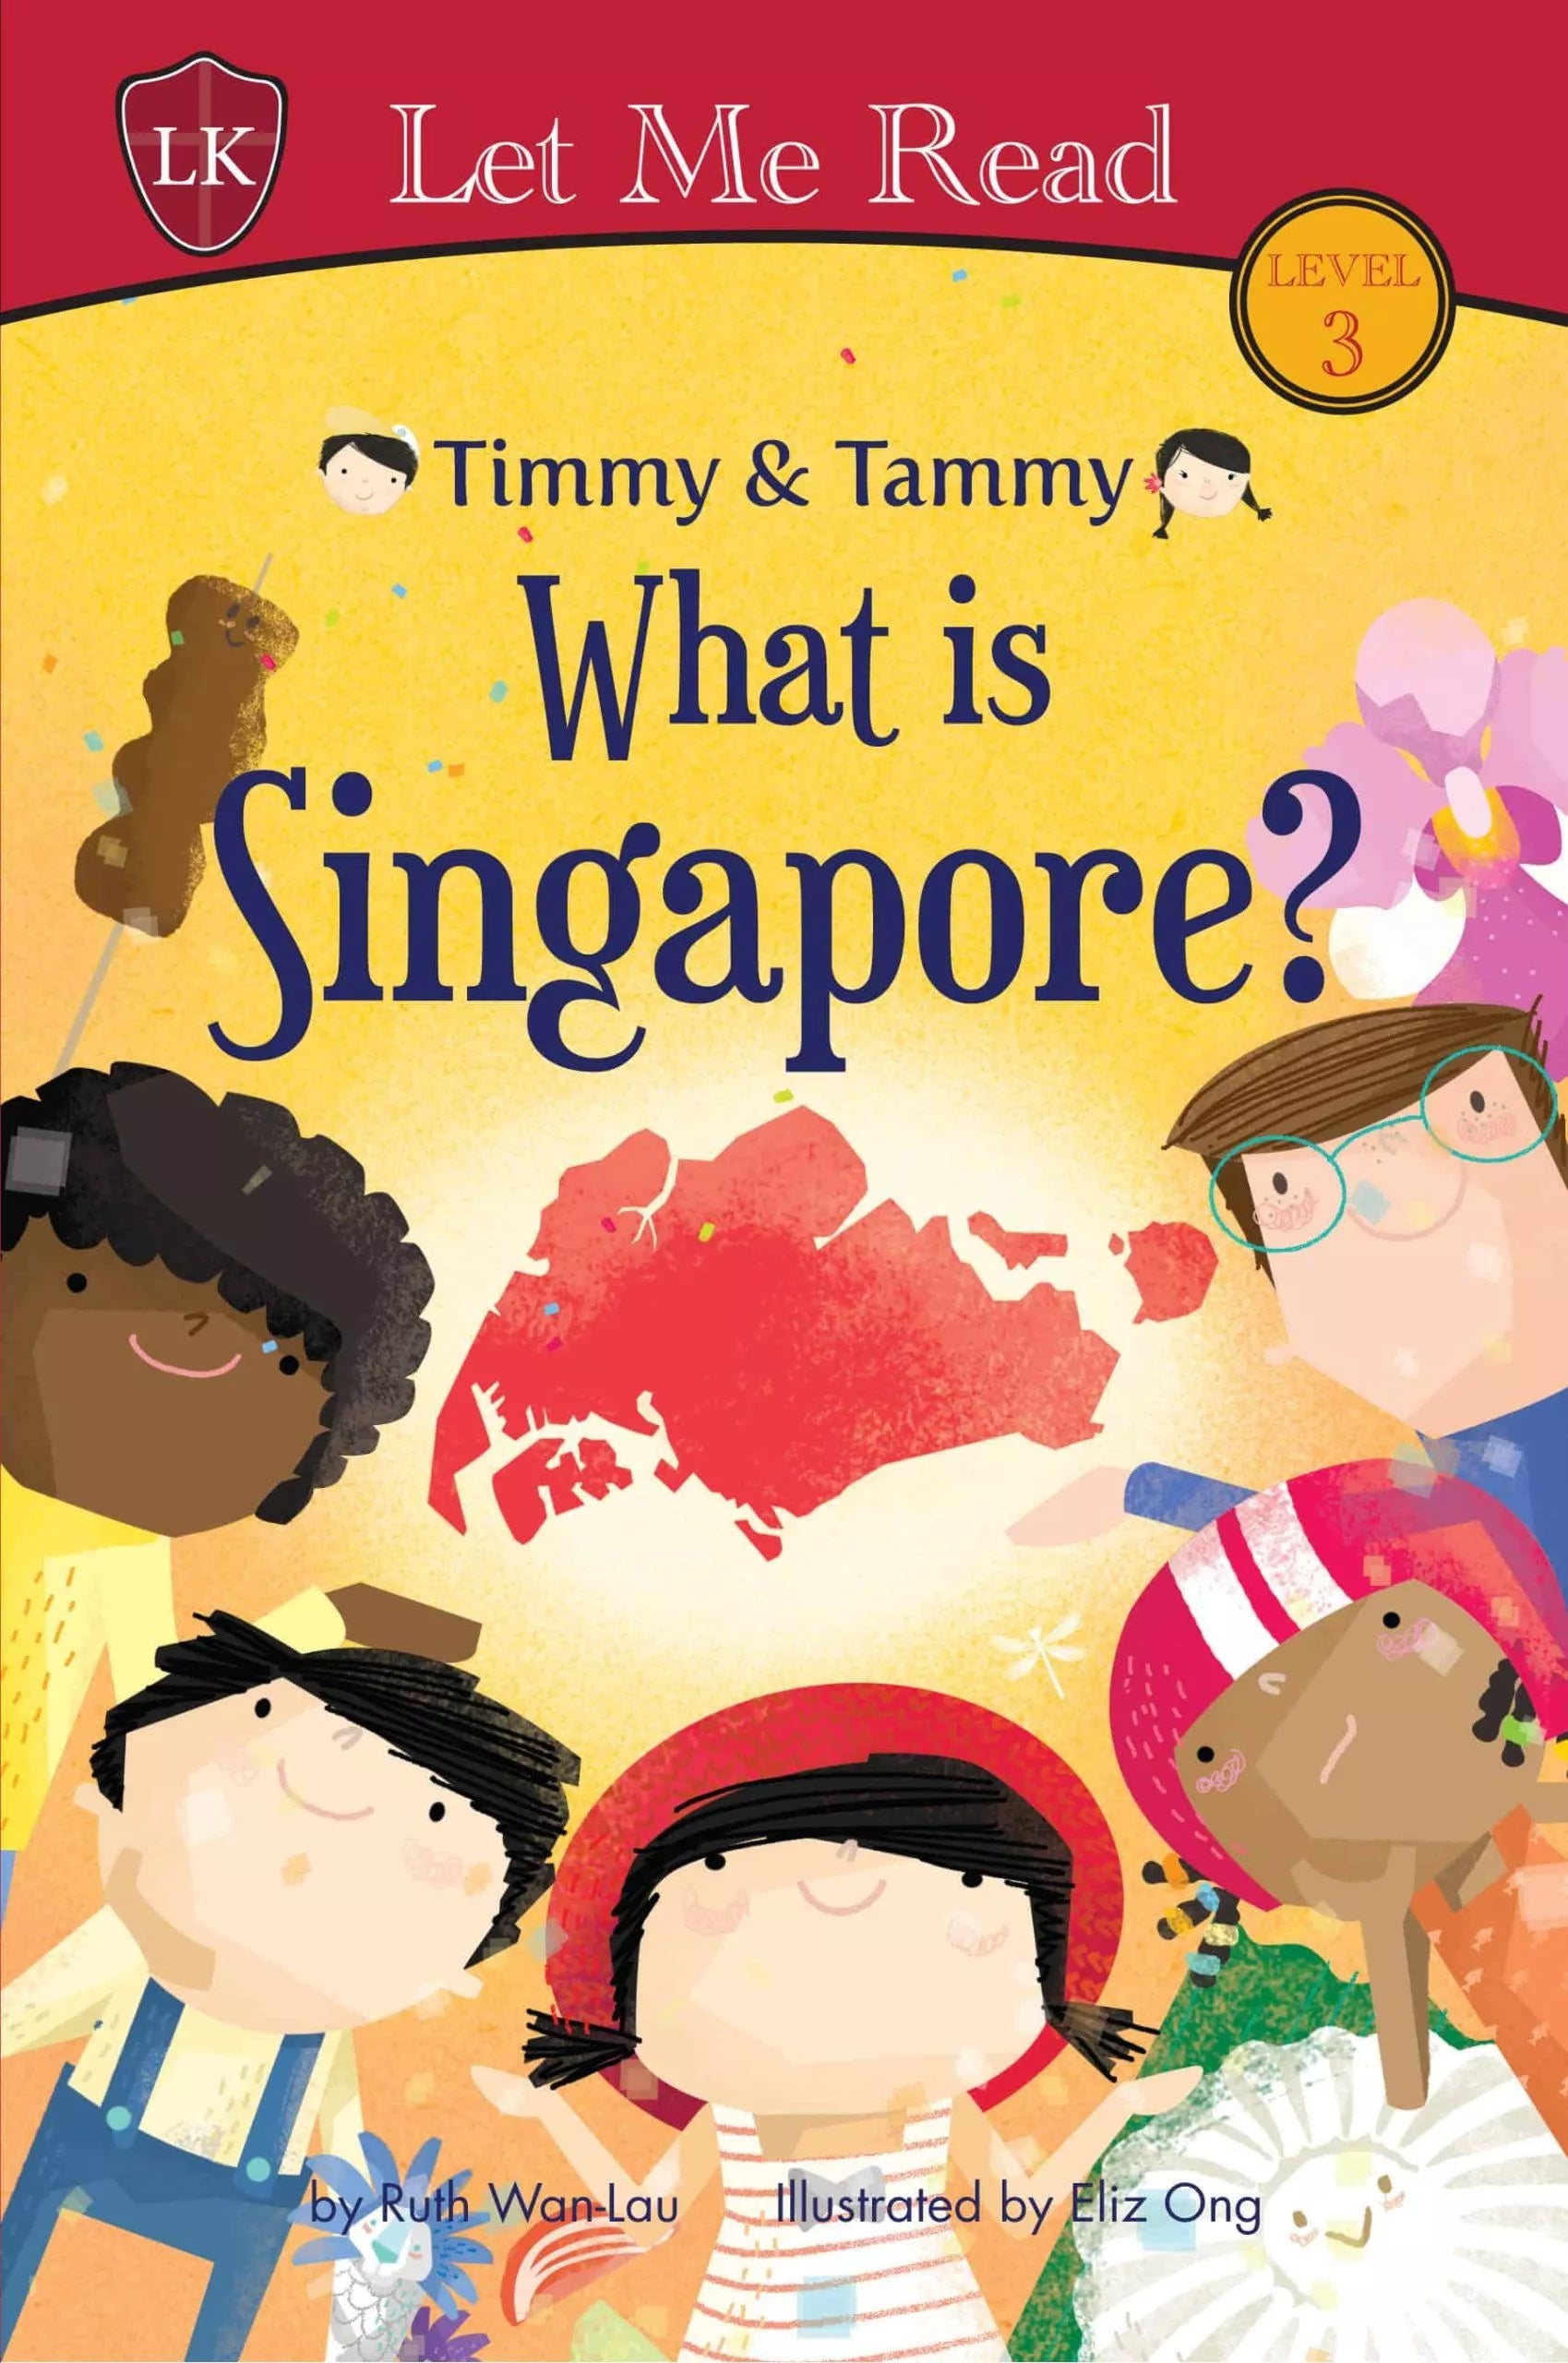 Timmy & Tammy (Level 3): What is Singapore?